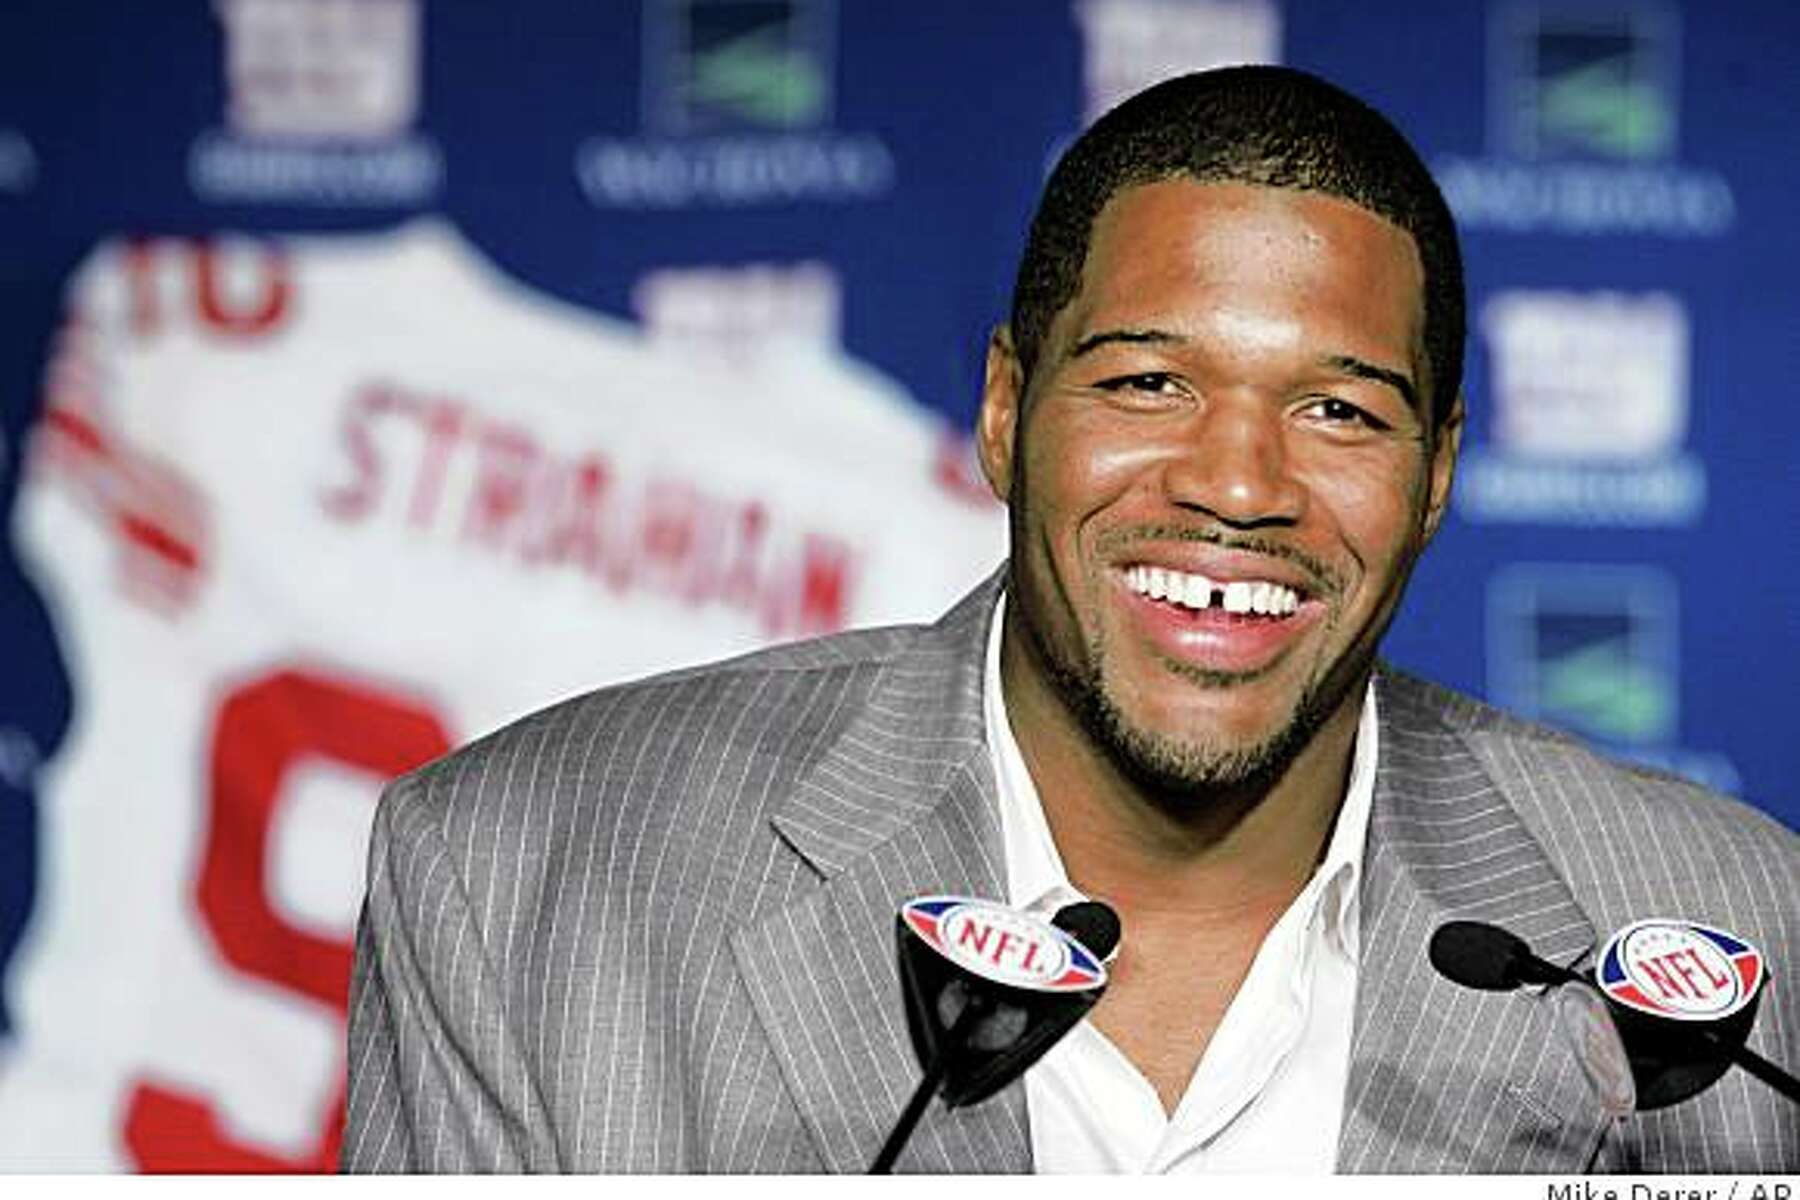 Giants Now: Strahan's No. 92 to be retired Sunday